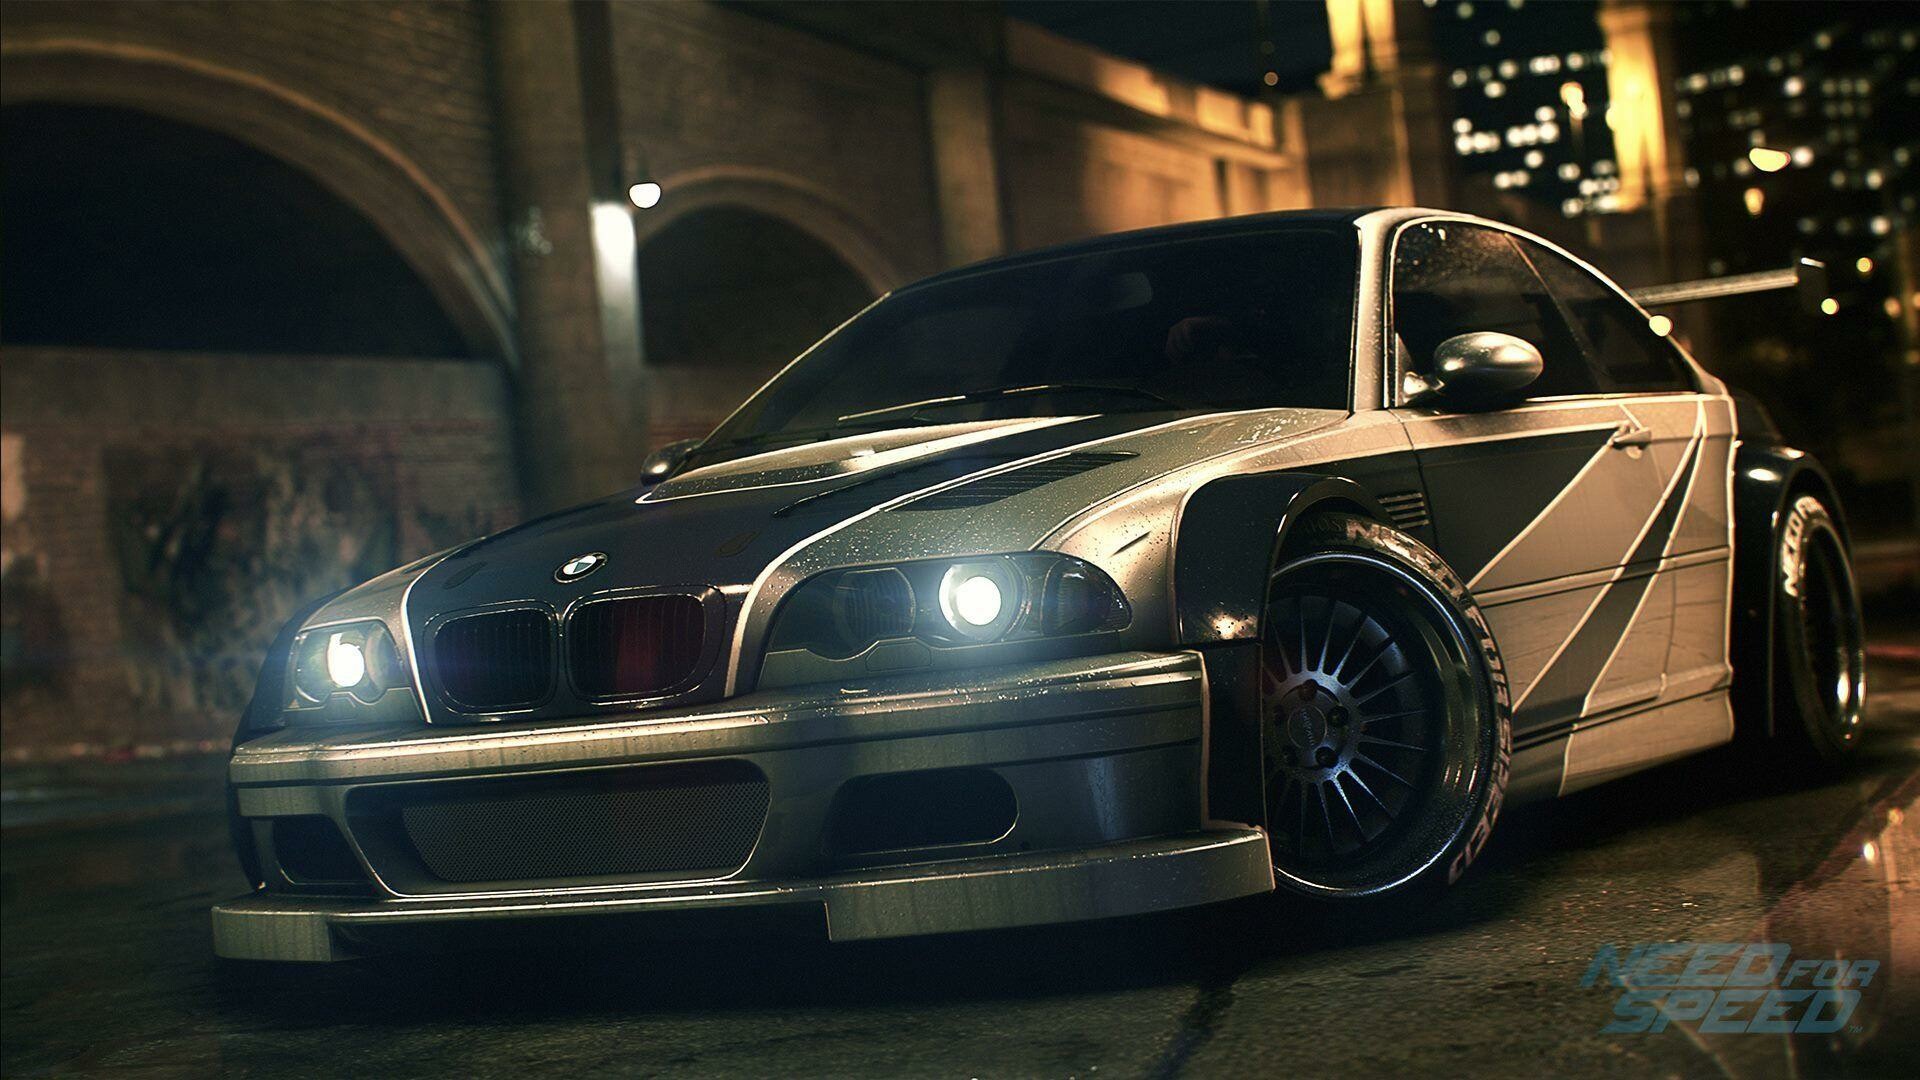 Need for Speed: A racing video game developed by EA, BMW, Racing cars. 1920x1080 Full HD Background.